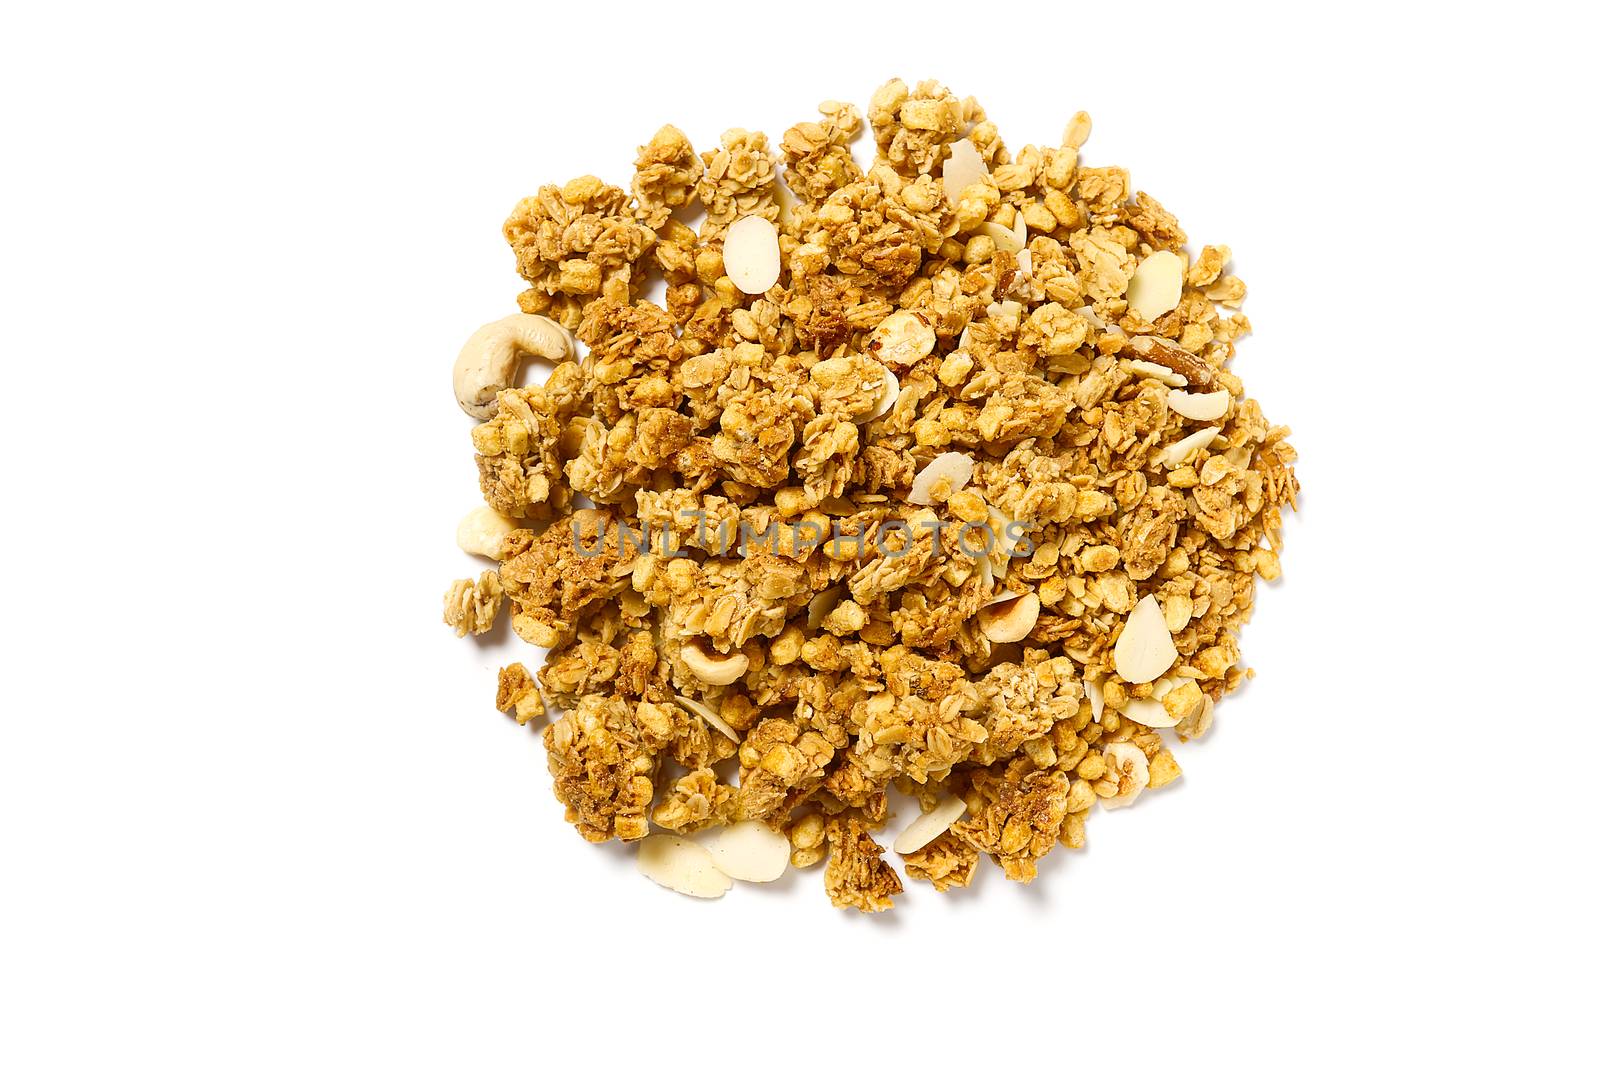 Small Granola Pile on a White Background. Small Muesli Pile with nuts isolated on white.